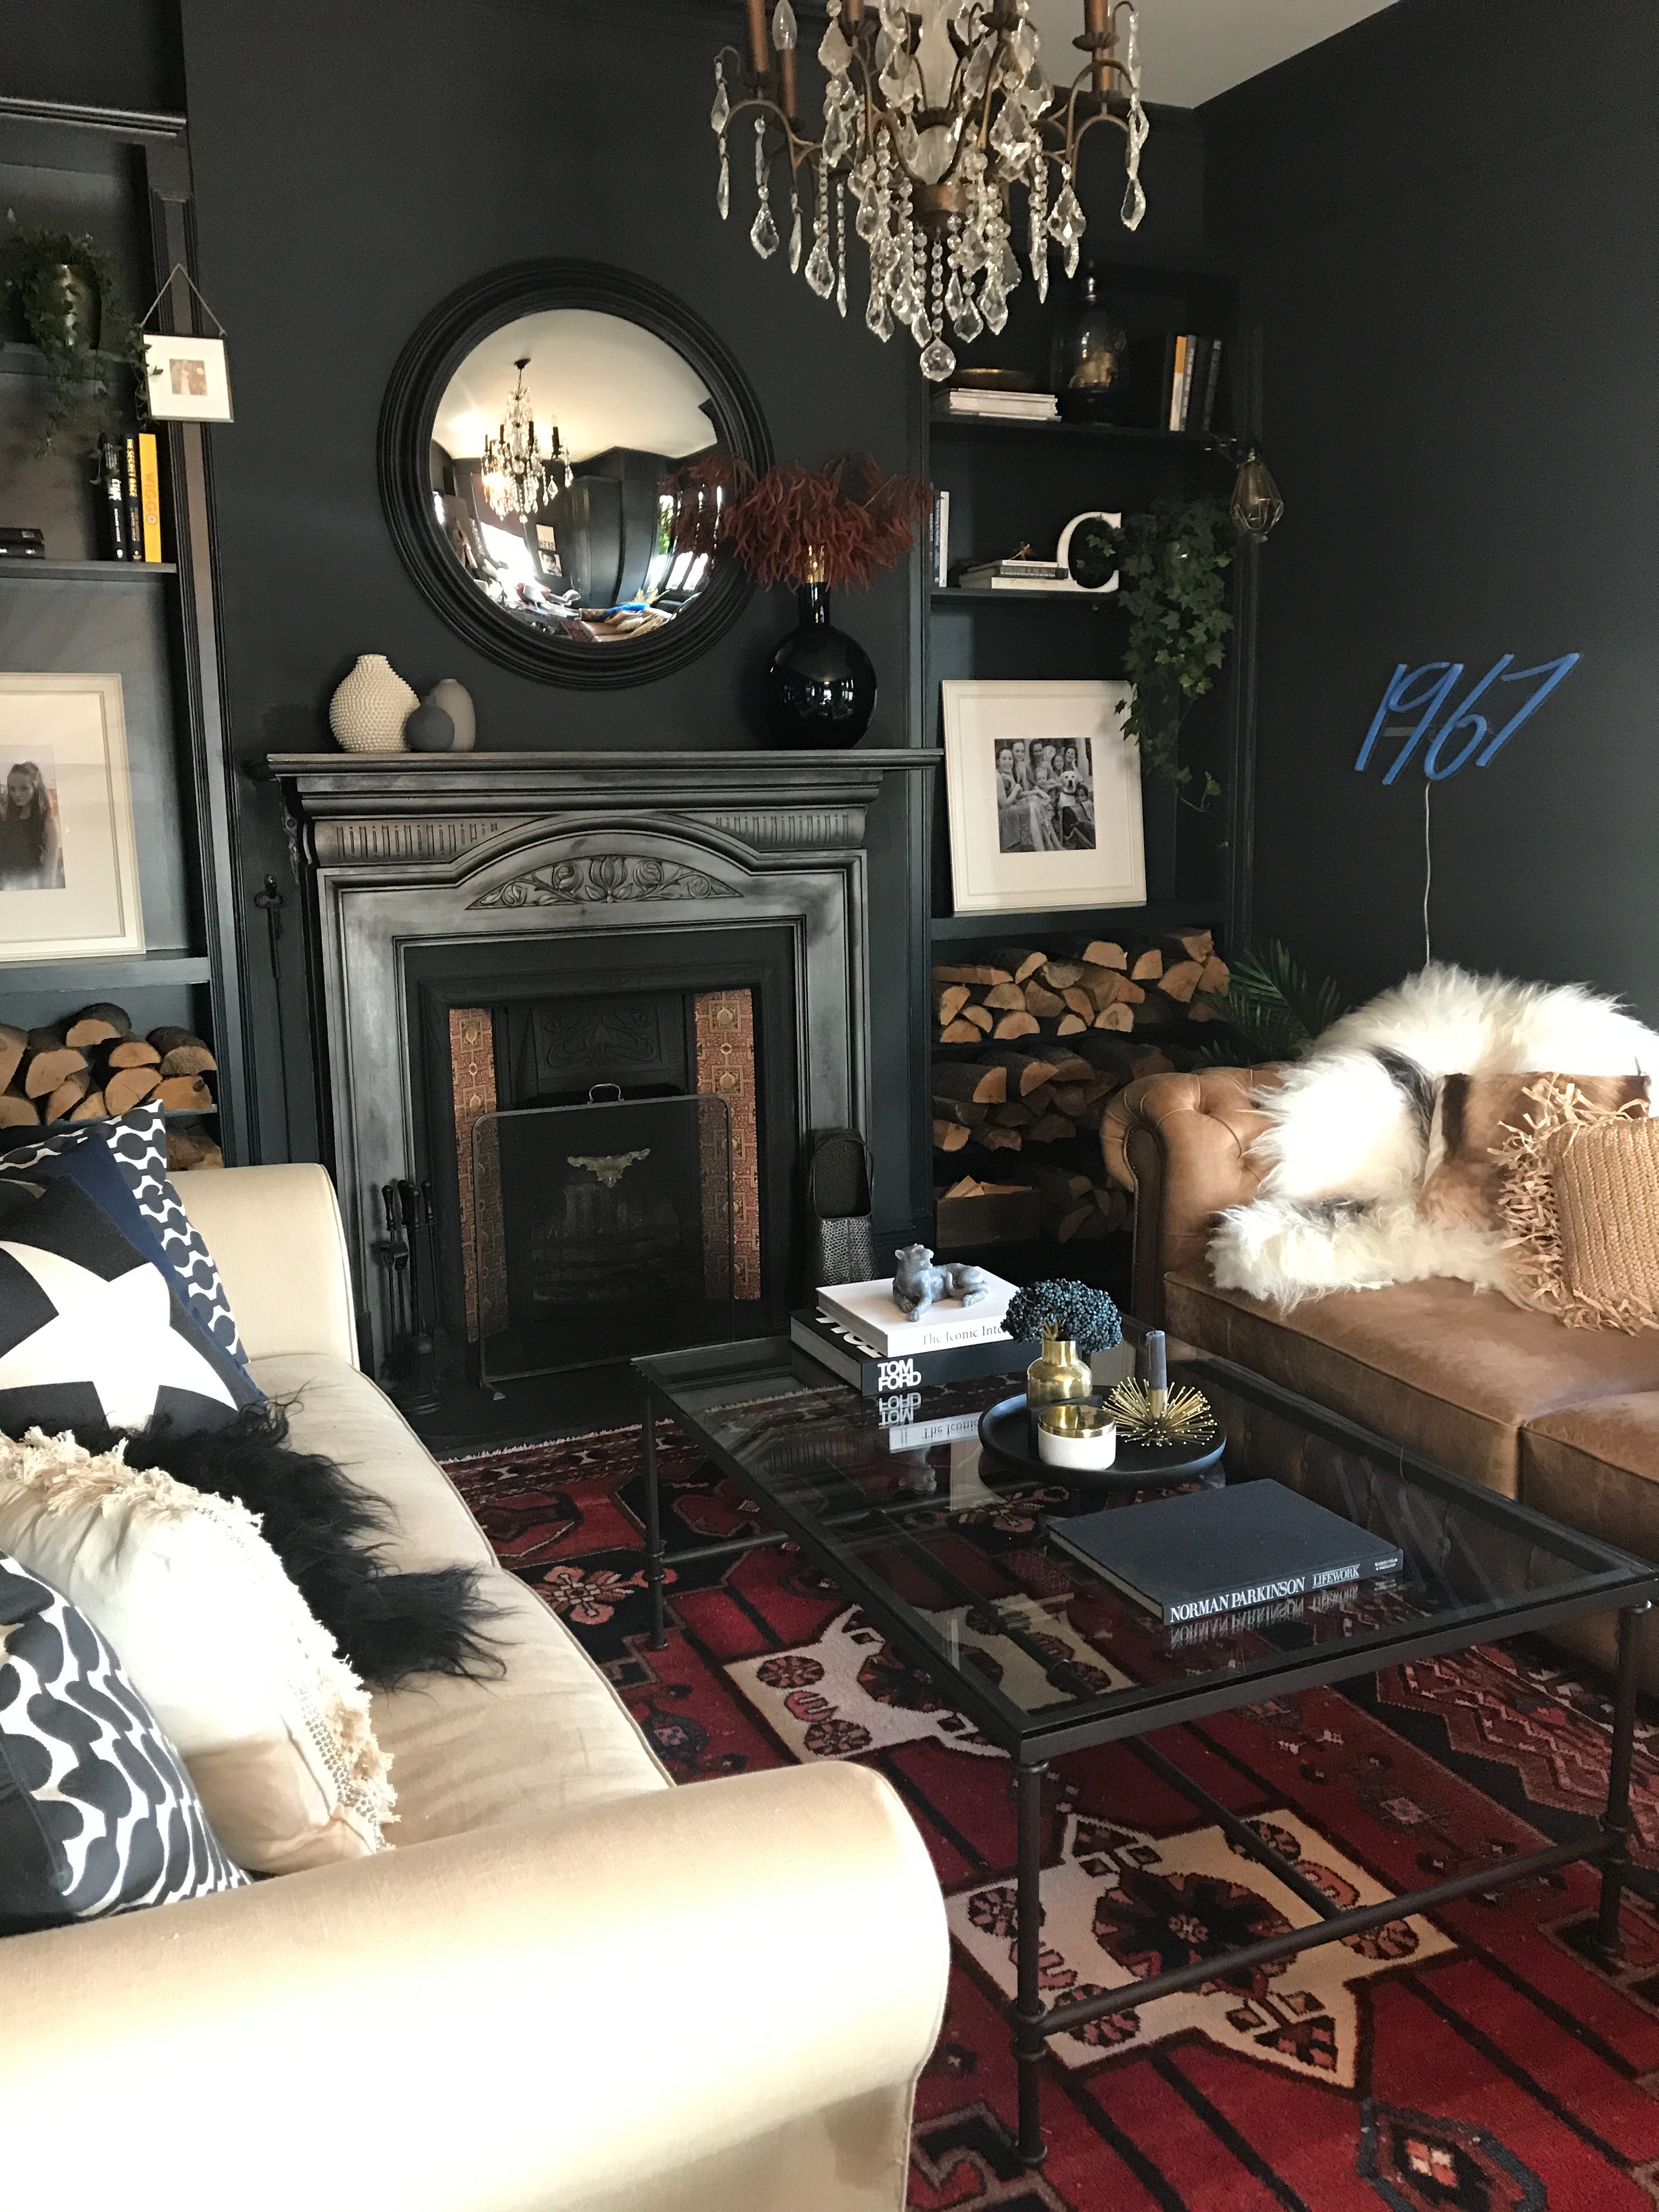 An Edwardian Home With A Dose Of Cool - Real Home Tour of Claire Botha